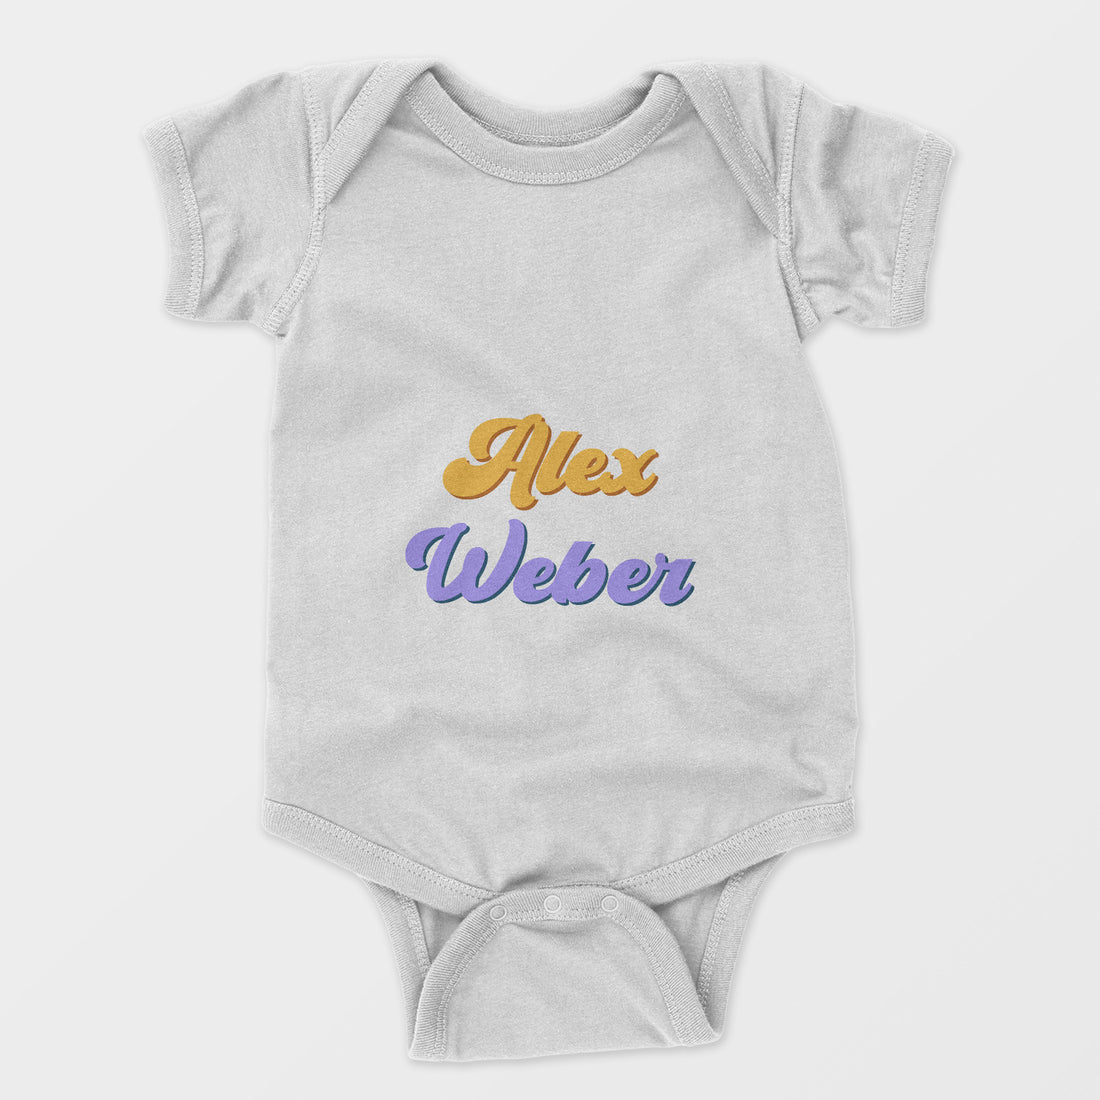 Personalized Baby Bodysuit Onesie For Newborn With Name